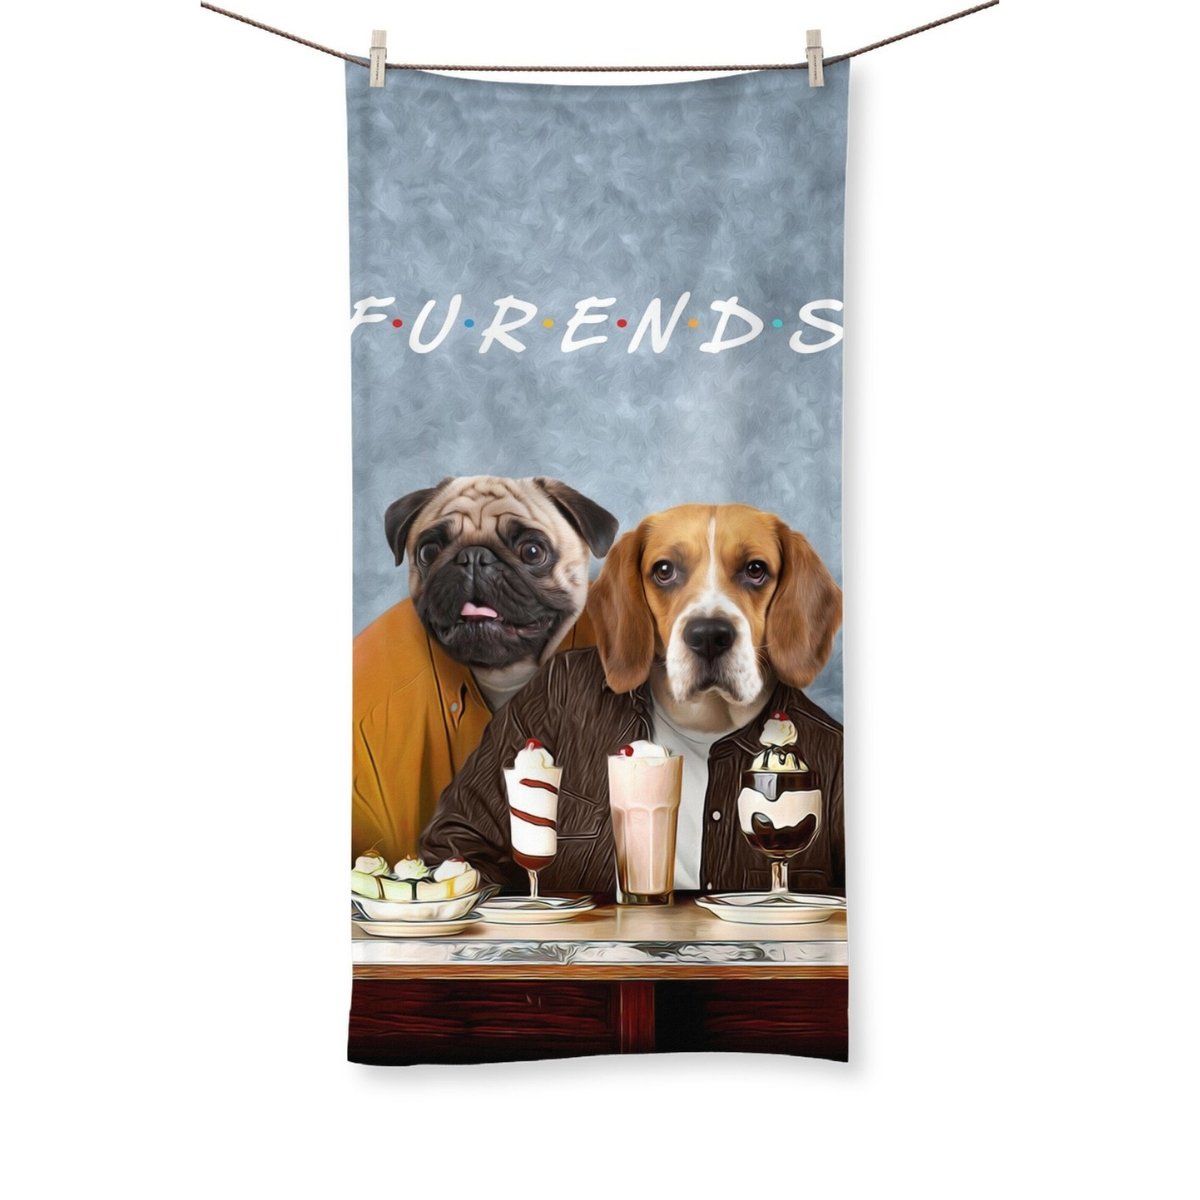 Two Furends: Custom Pet Towel - Paw & Glory - #pet portraits# - #dog portraits# - #pet portraits uk#paw & glory, pawandglory, dog astronaut photo, personalized pet and owner canvas, small dog portrait, custom pet painting, pet portraits usa, pet portraits usa, pet portrait,custom pet portrait Towel